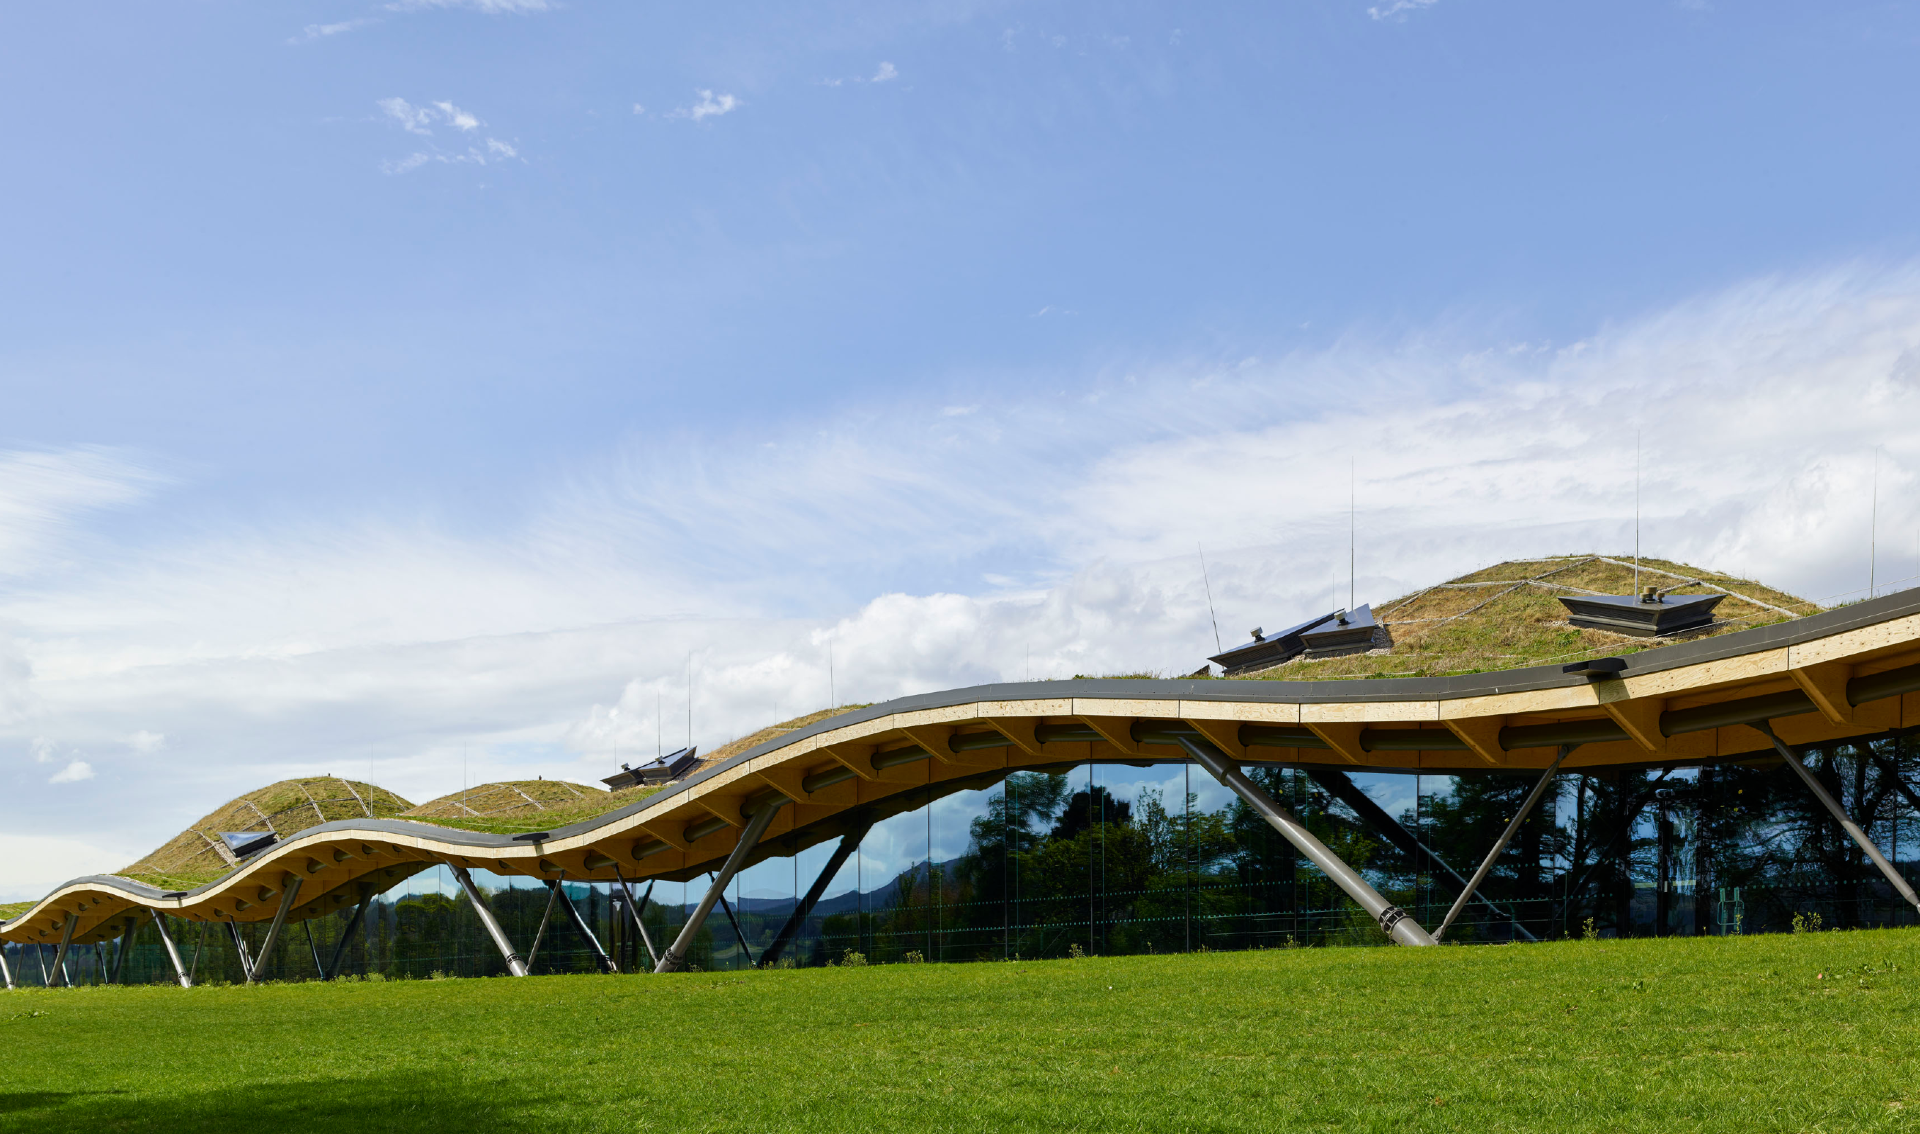 The Macallan distillery has continued to be recognised as a global architectural success, winning the RIAS Andrew Doolan award for Best Building in Scotland.